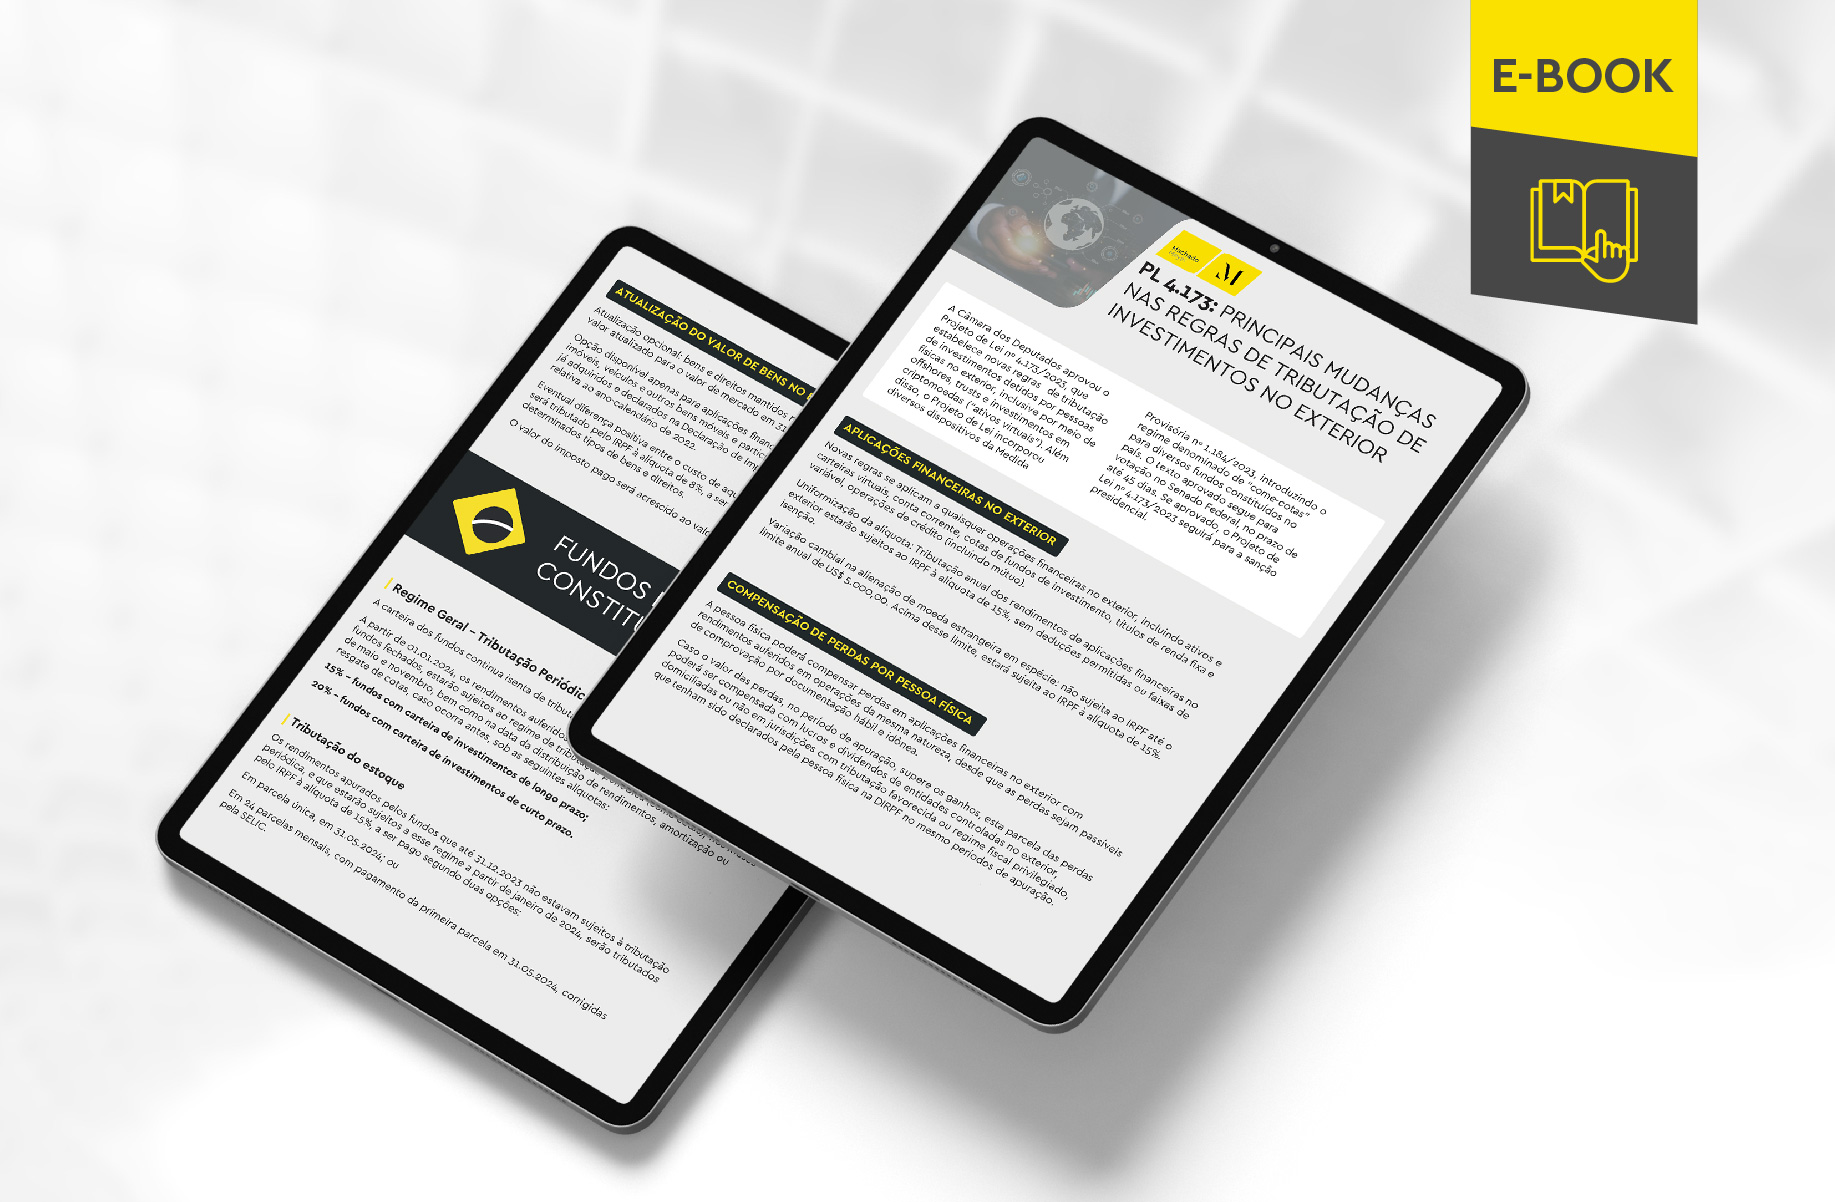 Illustrative mockup of two tablets, one above the other, with images of the e-book's internal content. In the top right-hand corner, a descriptive strip in yellow and gray, with the name "e-book" written on it.